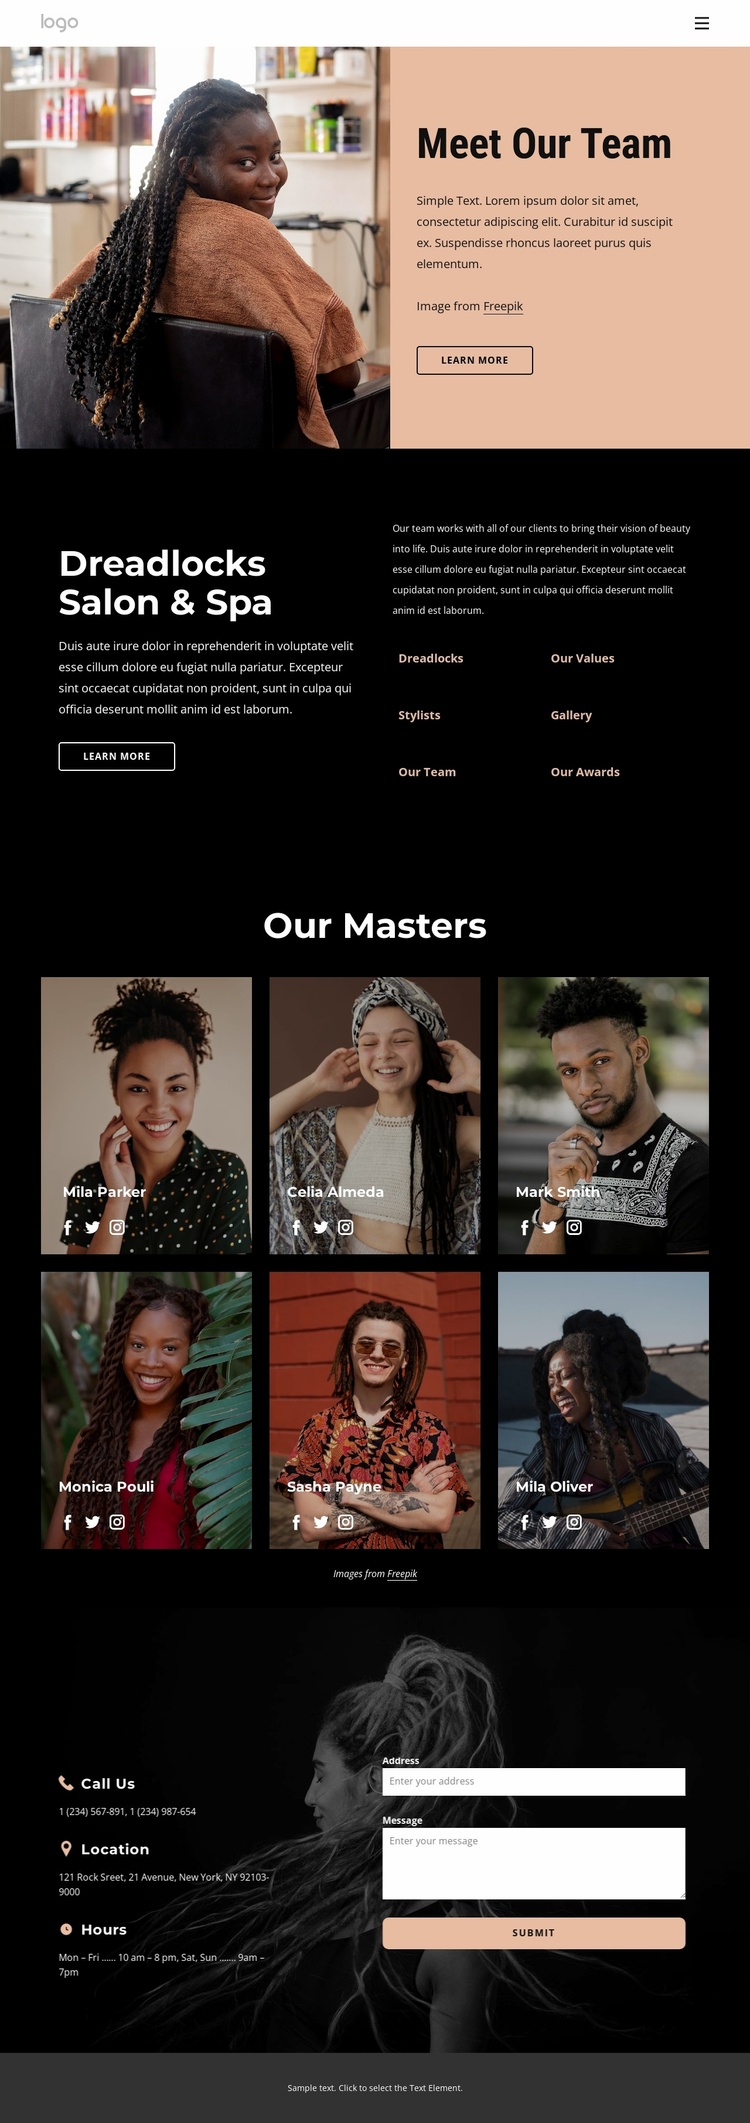 Meet our masters Landing Page